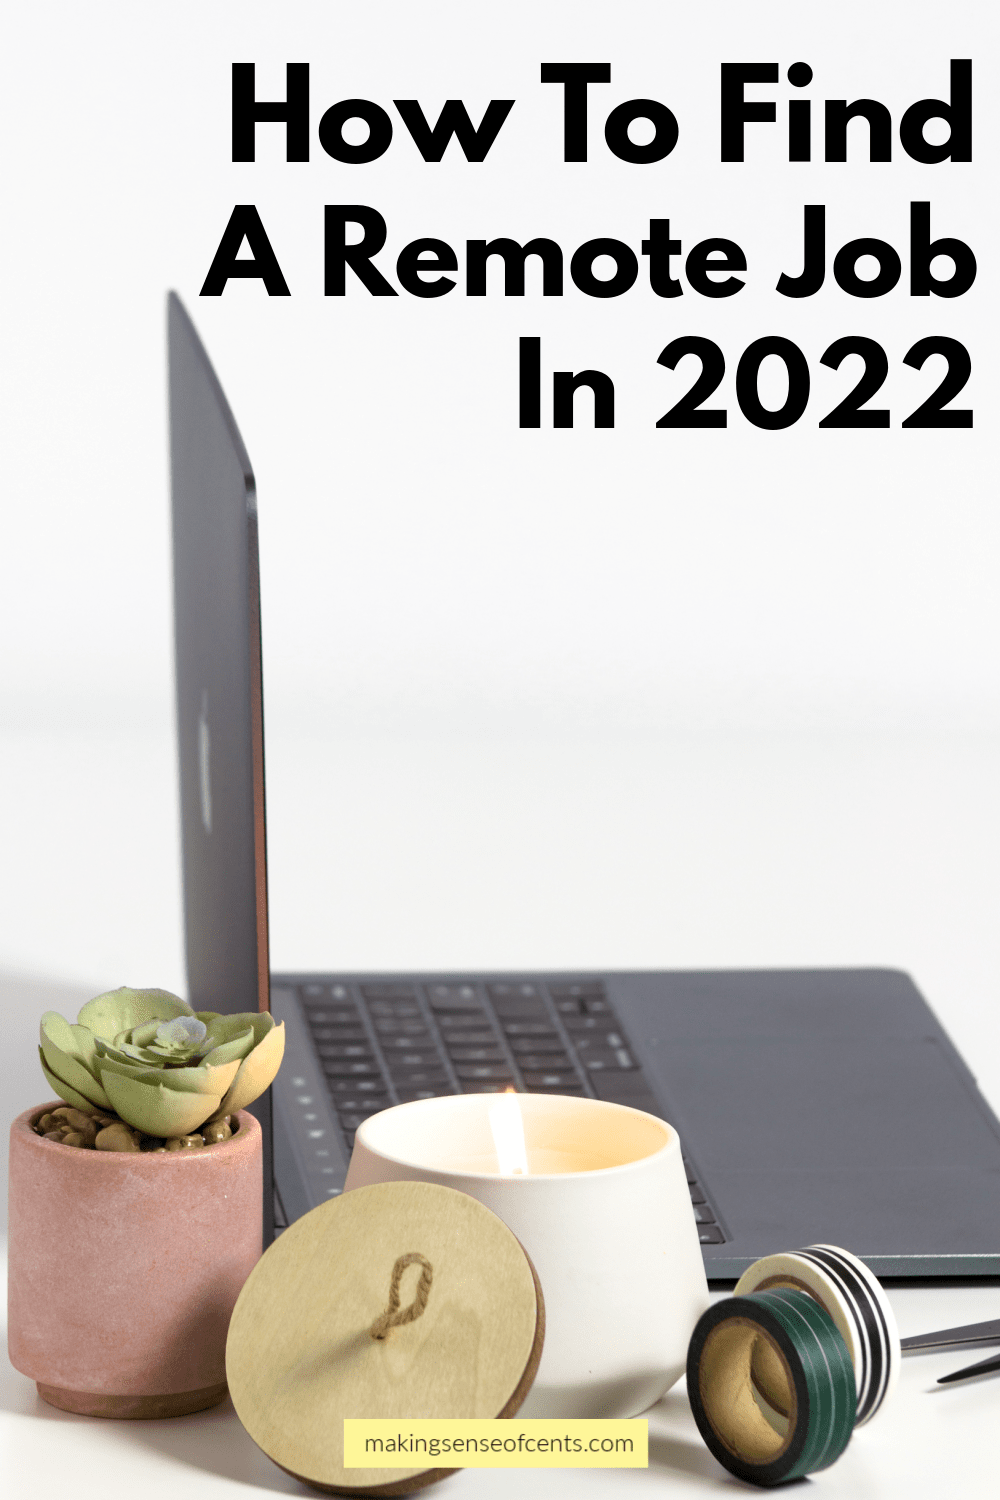 How to find your next remote job this weekend in 2022